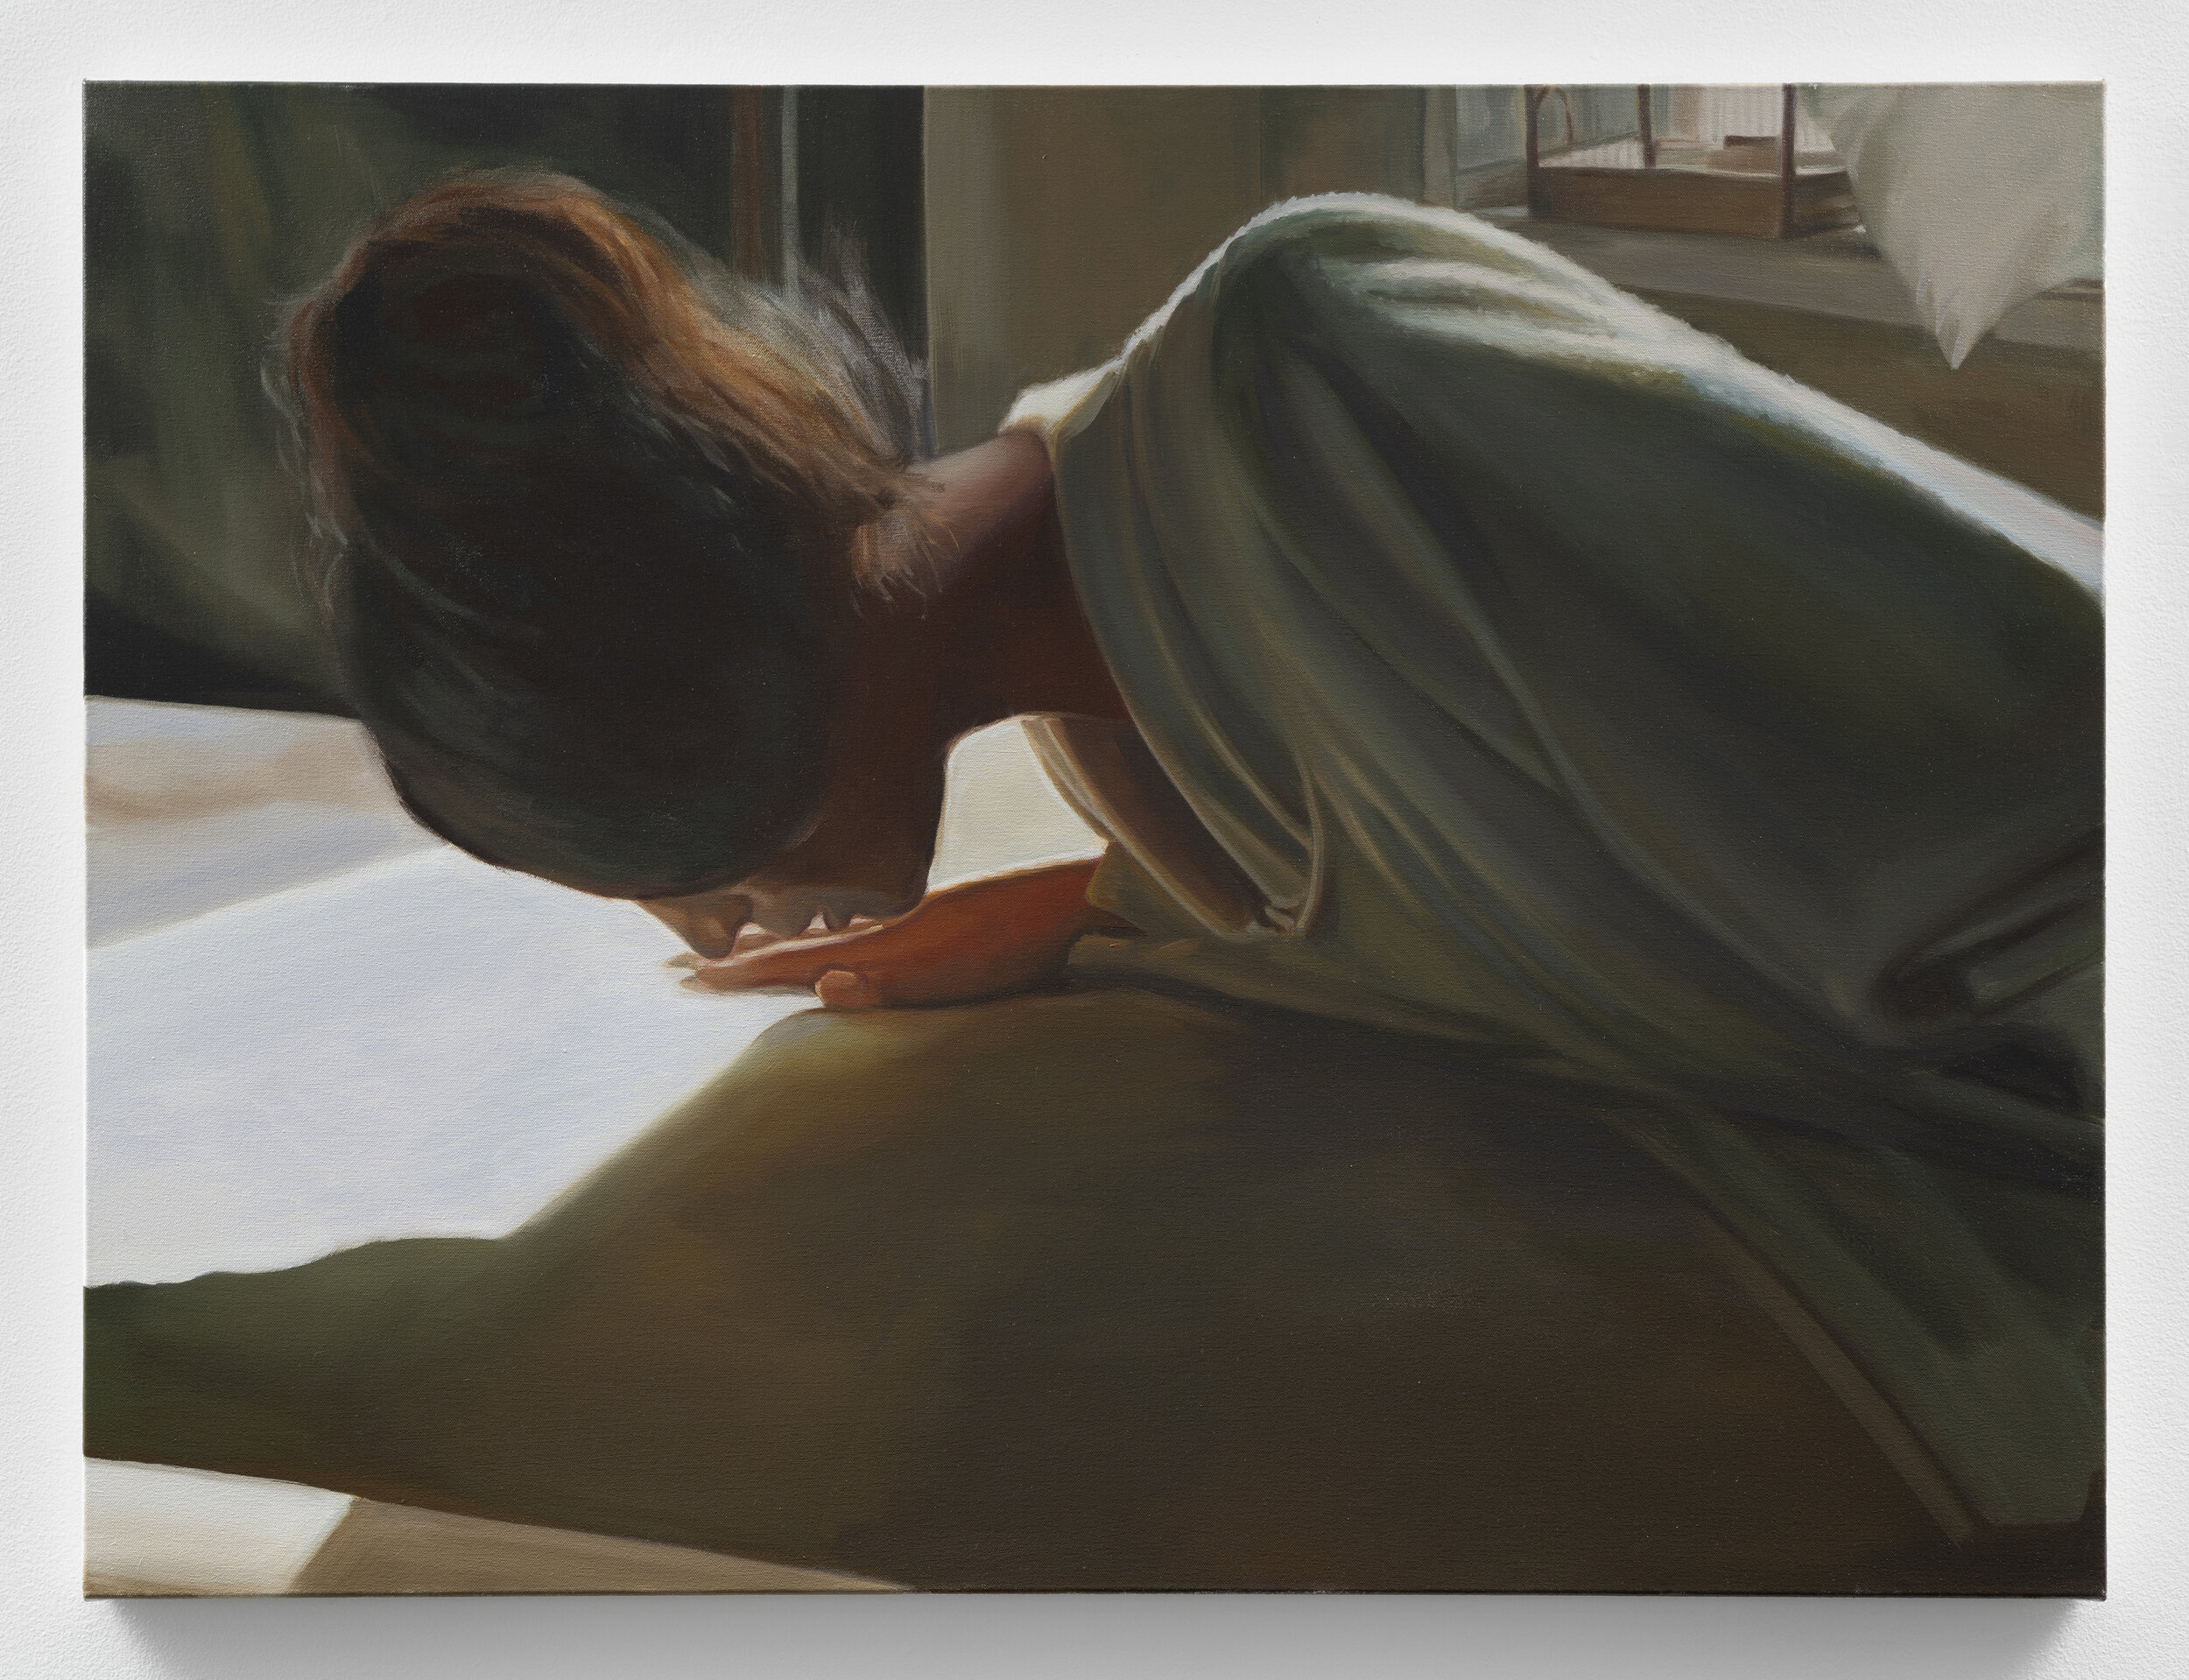   Woman in Reflecting Light , 2021. Oil on canvas. 30 x 40 inches. 